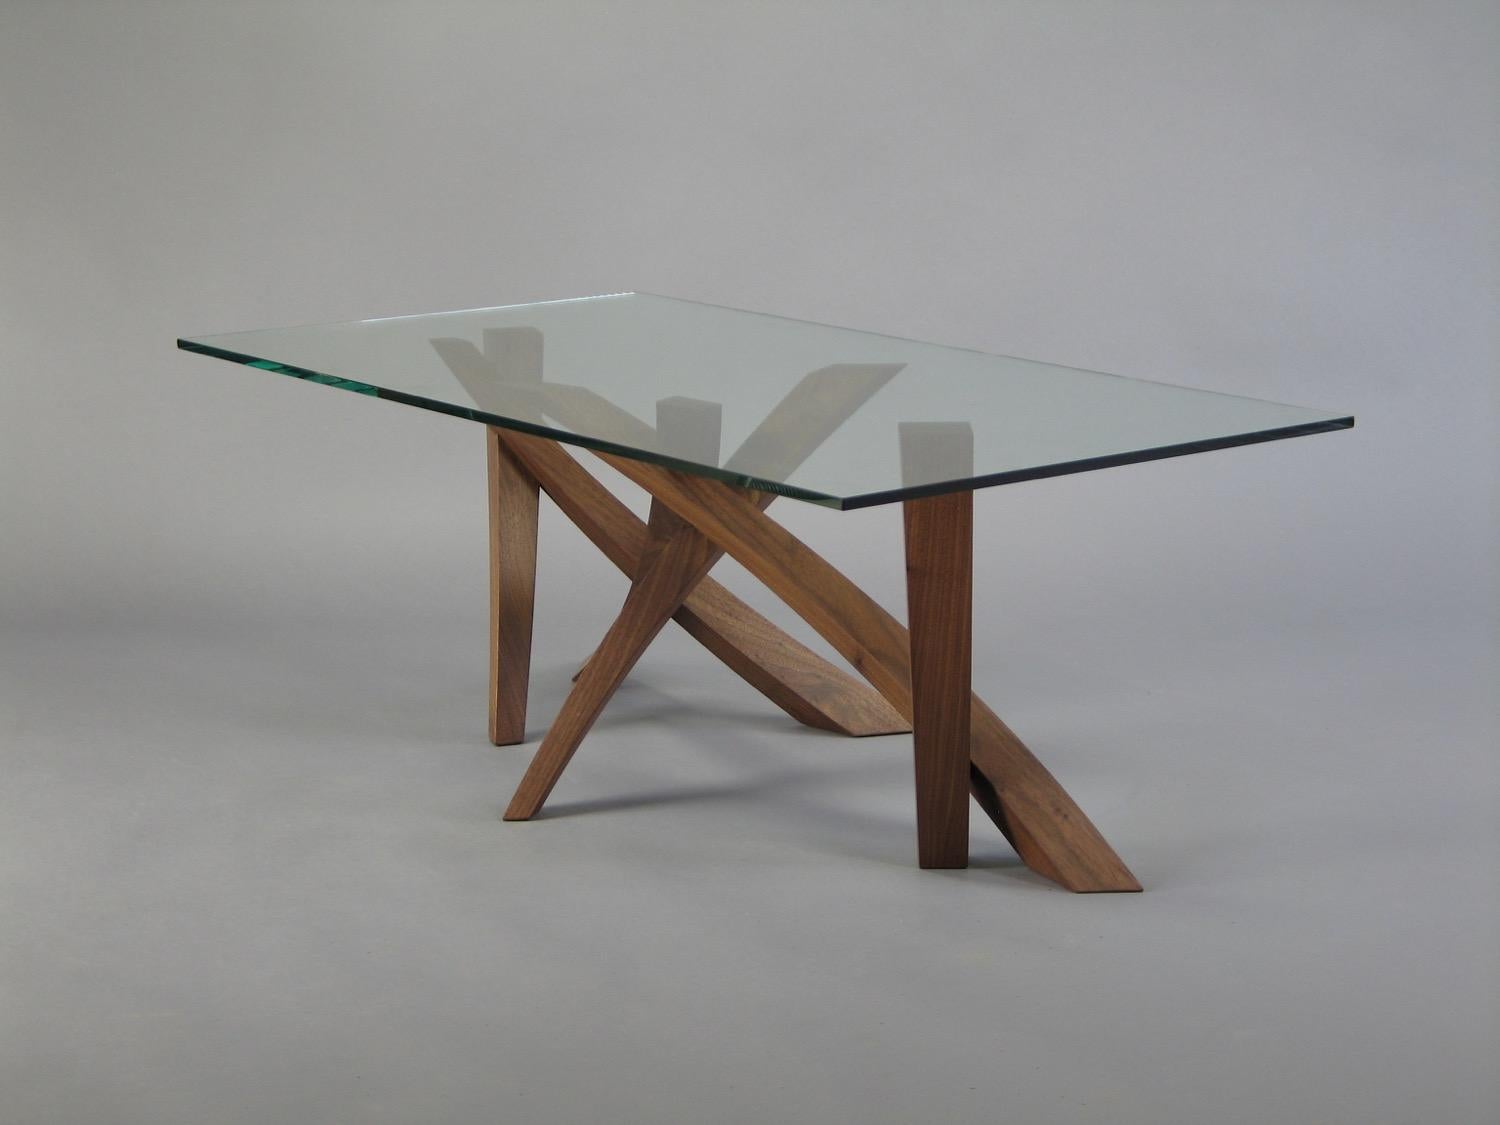 American Sculptural Walnut and Glass Coffee Table by Thomas Throop/ Black Creek Designs For Sale